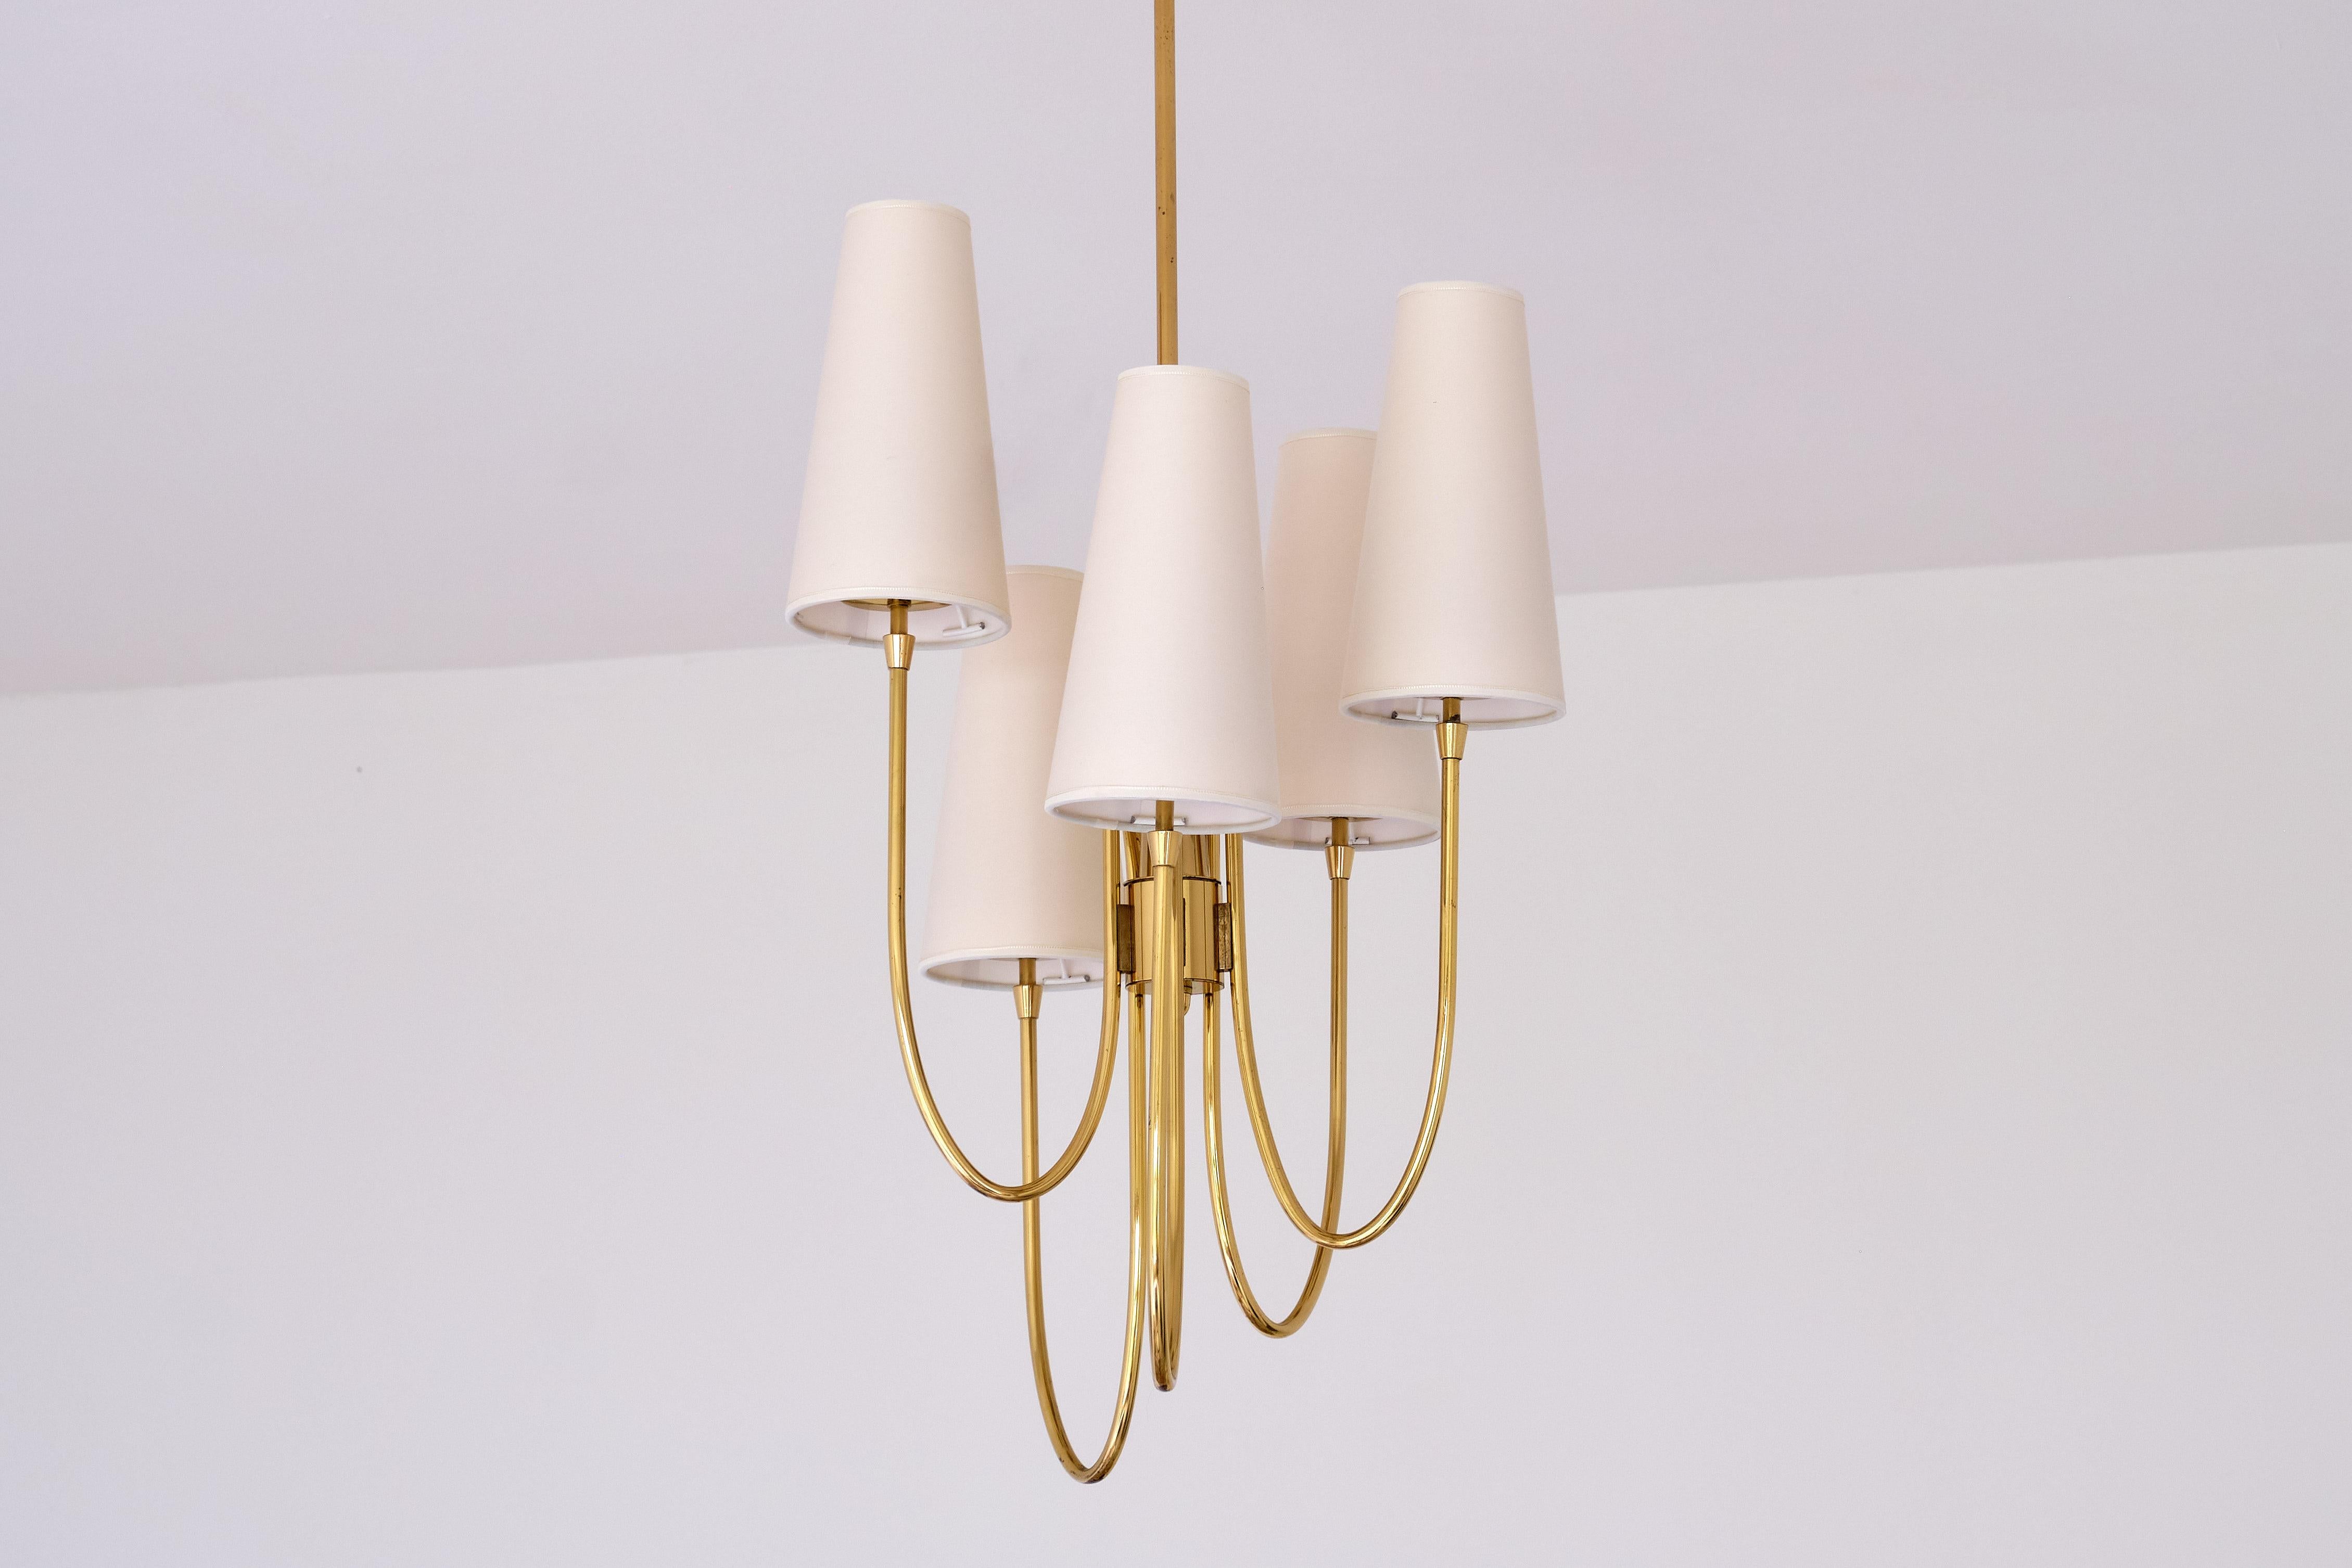 Guglielmo Ulrich Attributed Five Arm Chandelier, Brass and Fabric, Italy, 1940s 3